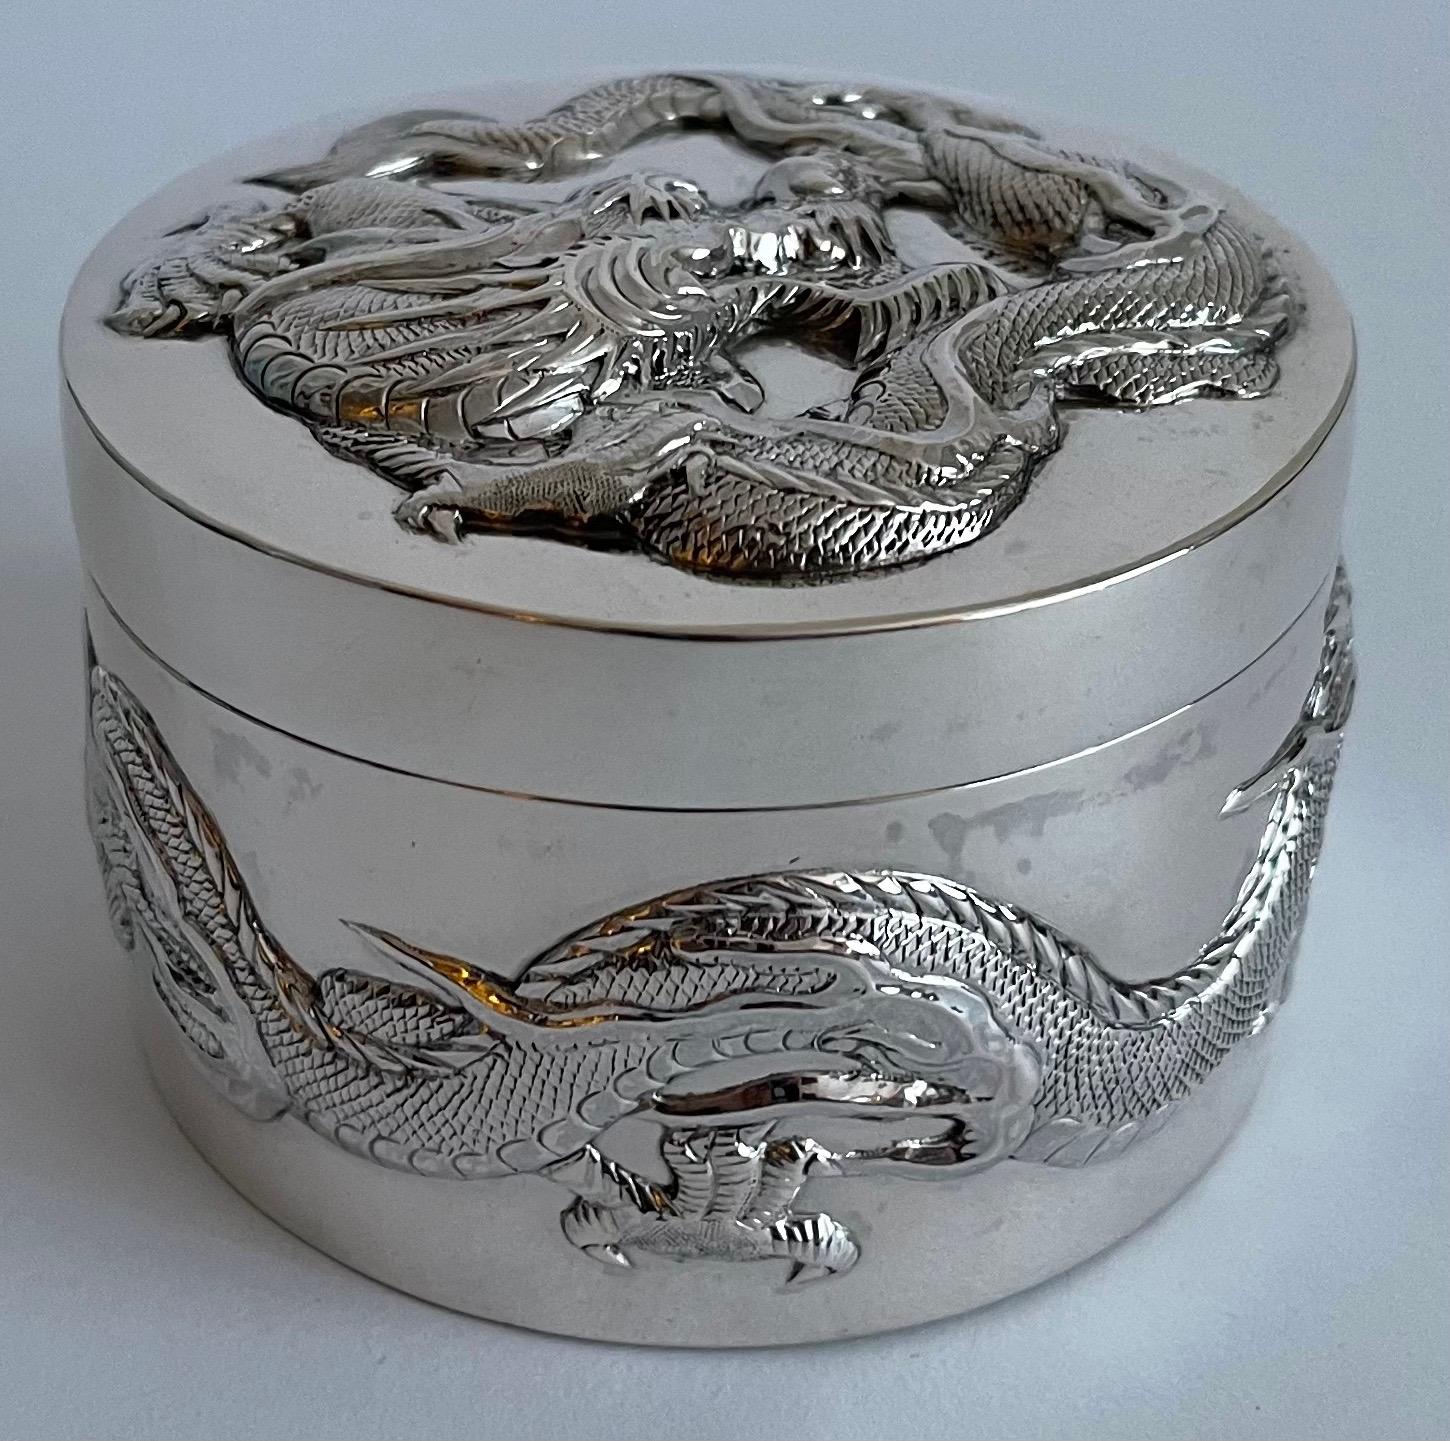 Repoussé Chinese Export Silver Dragon Box